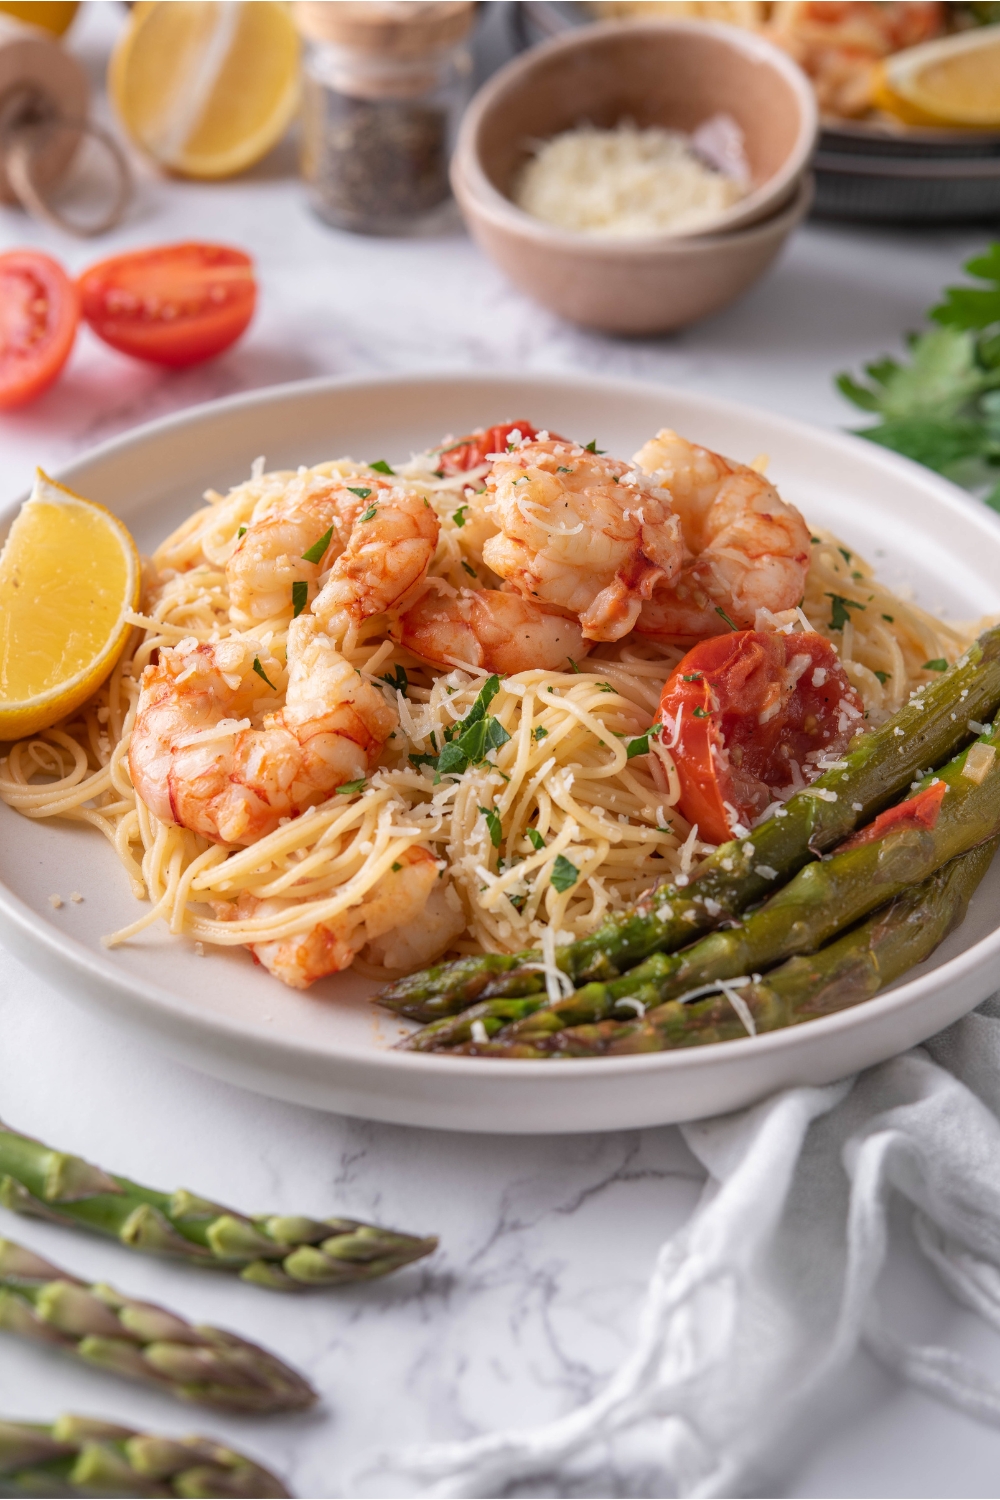 Olive Garden shrimp scampi piled on a white plate with a side of asparagus and a lemon wedge. The shrimp is garnished with fresh green herbs.